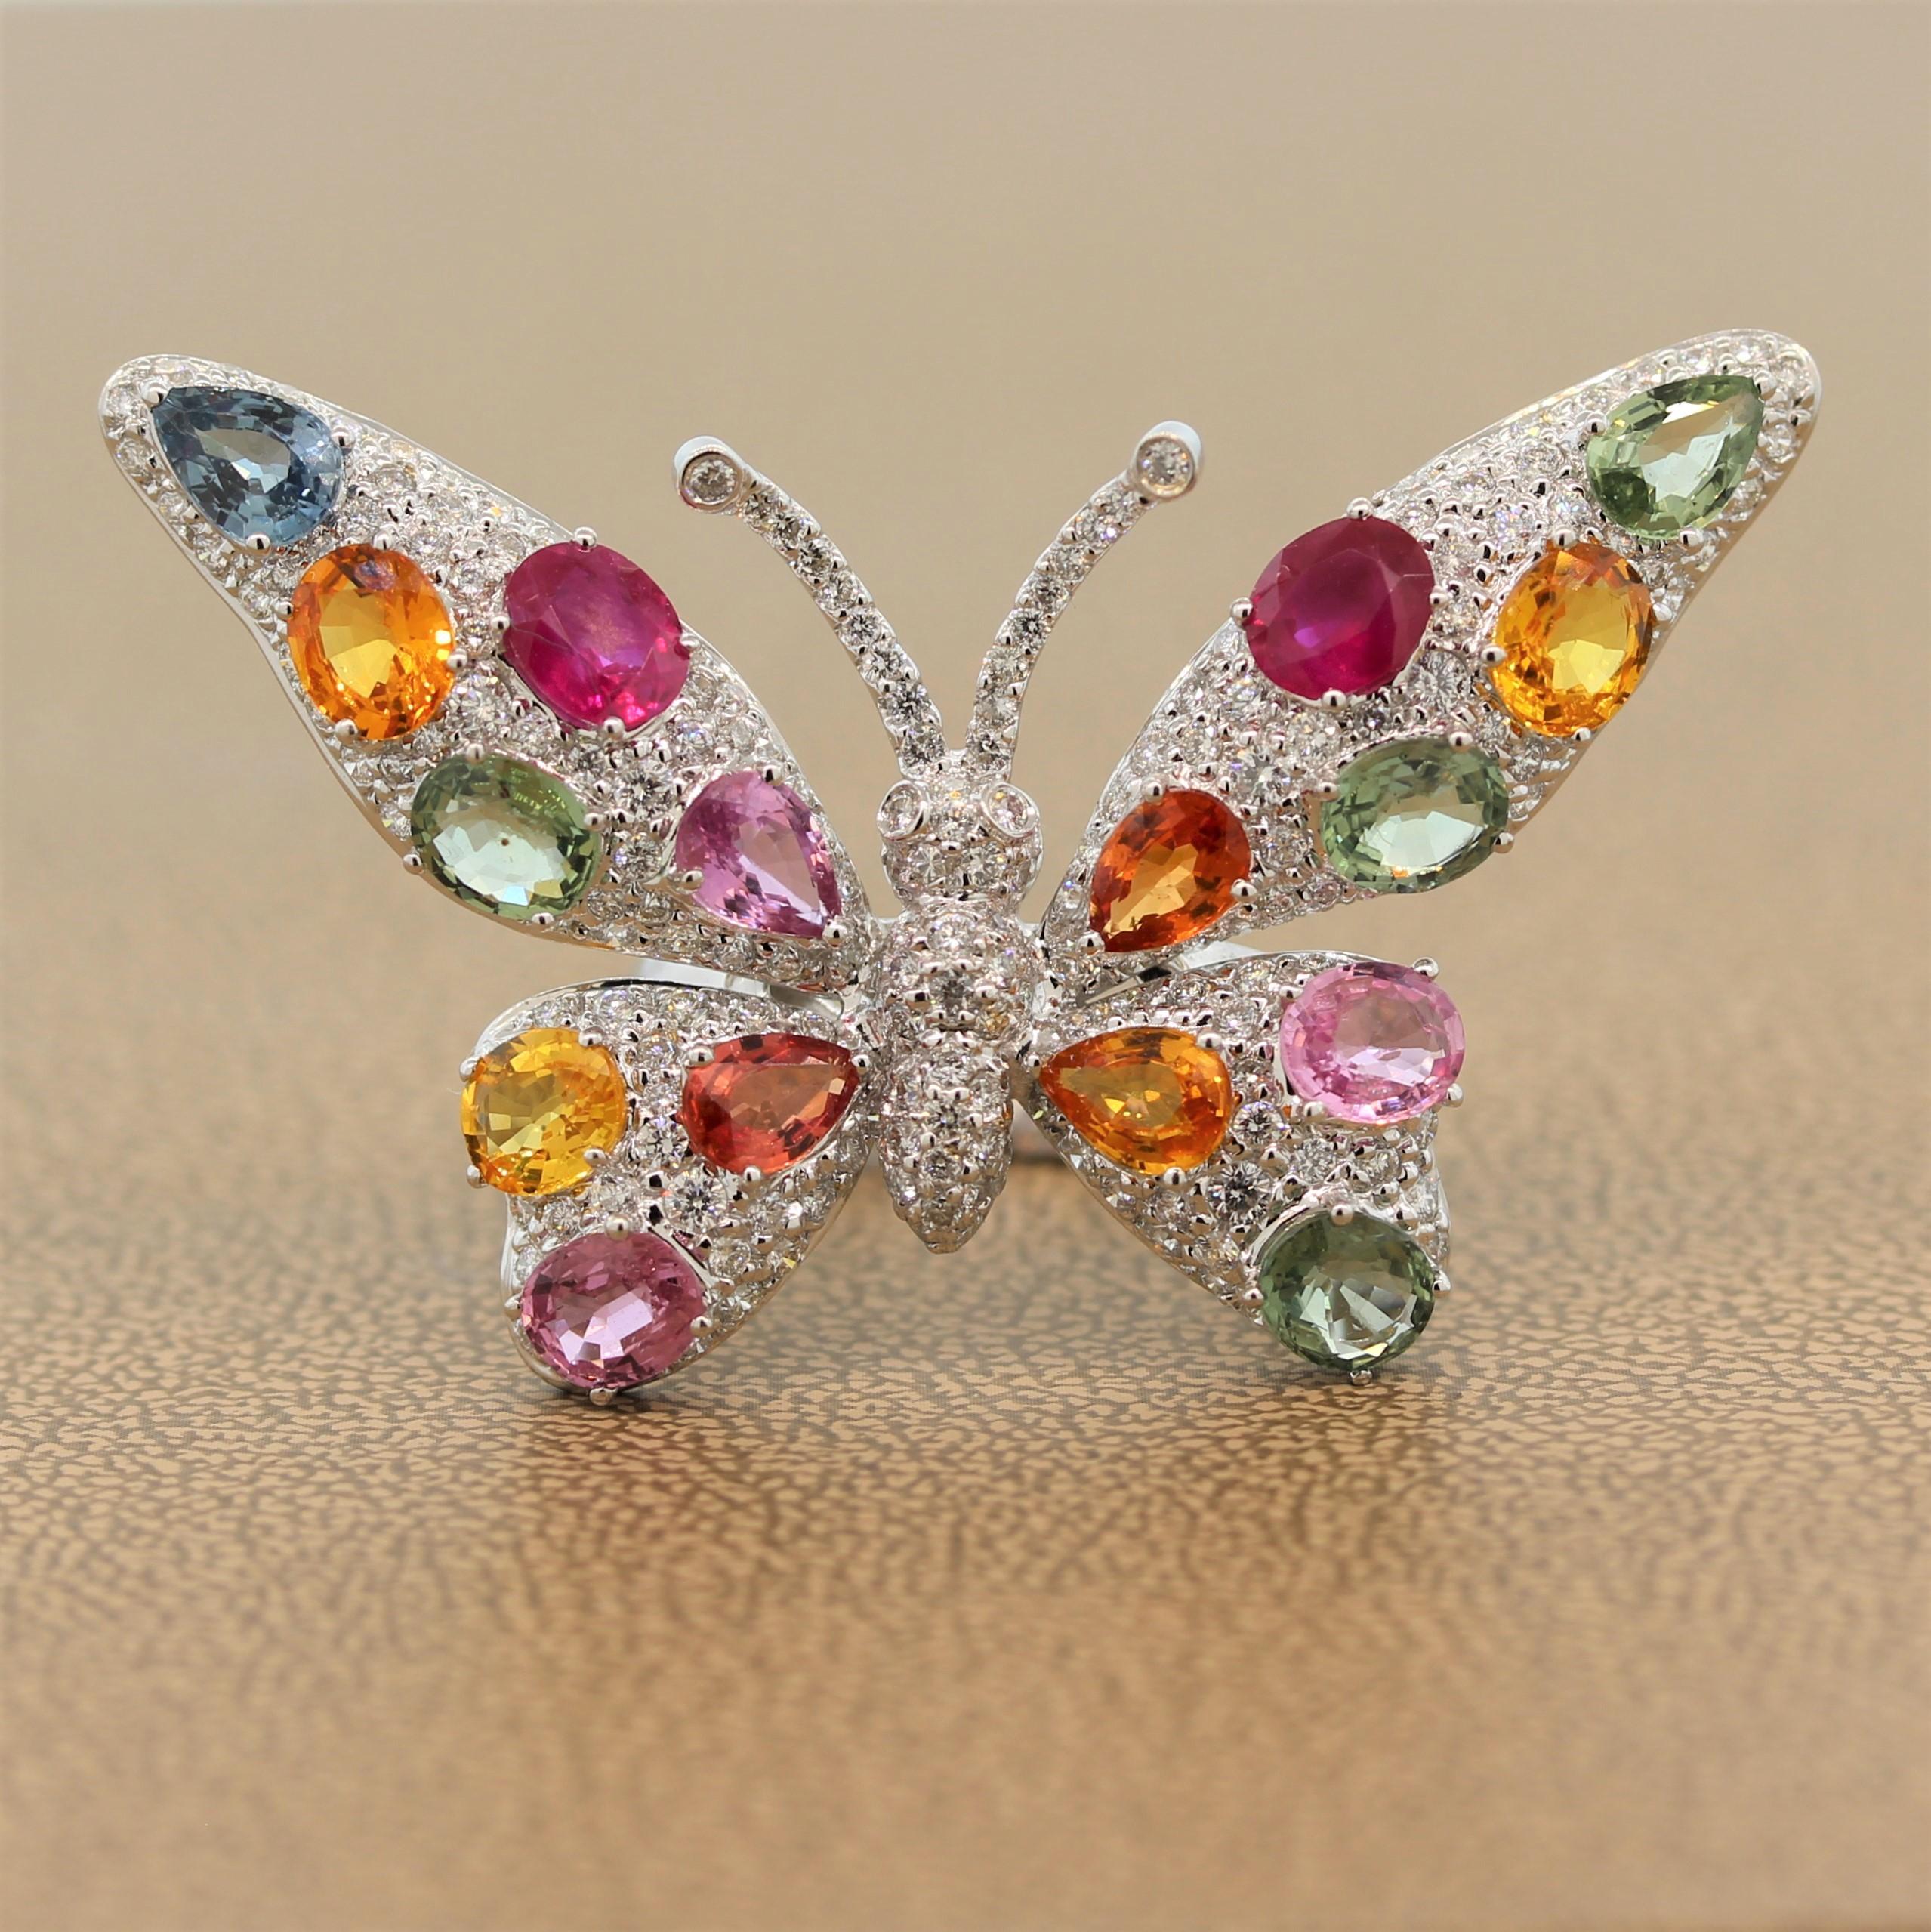 This butterfly is ready to take flight! A splendid ring featuring 8.56 carats of rubies and multi-colored fancy sapphires. The oval and pear cut gemstones cover the wings of the 18K white gold ring with 1.91 carats of shimmering diamonds covering